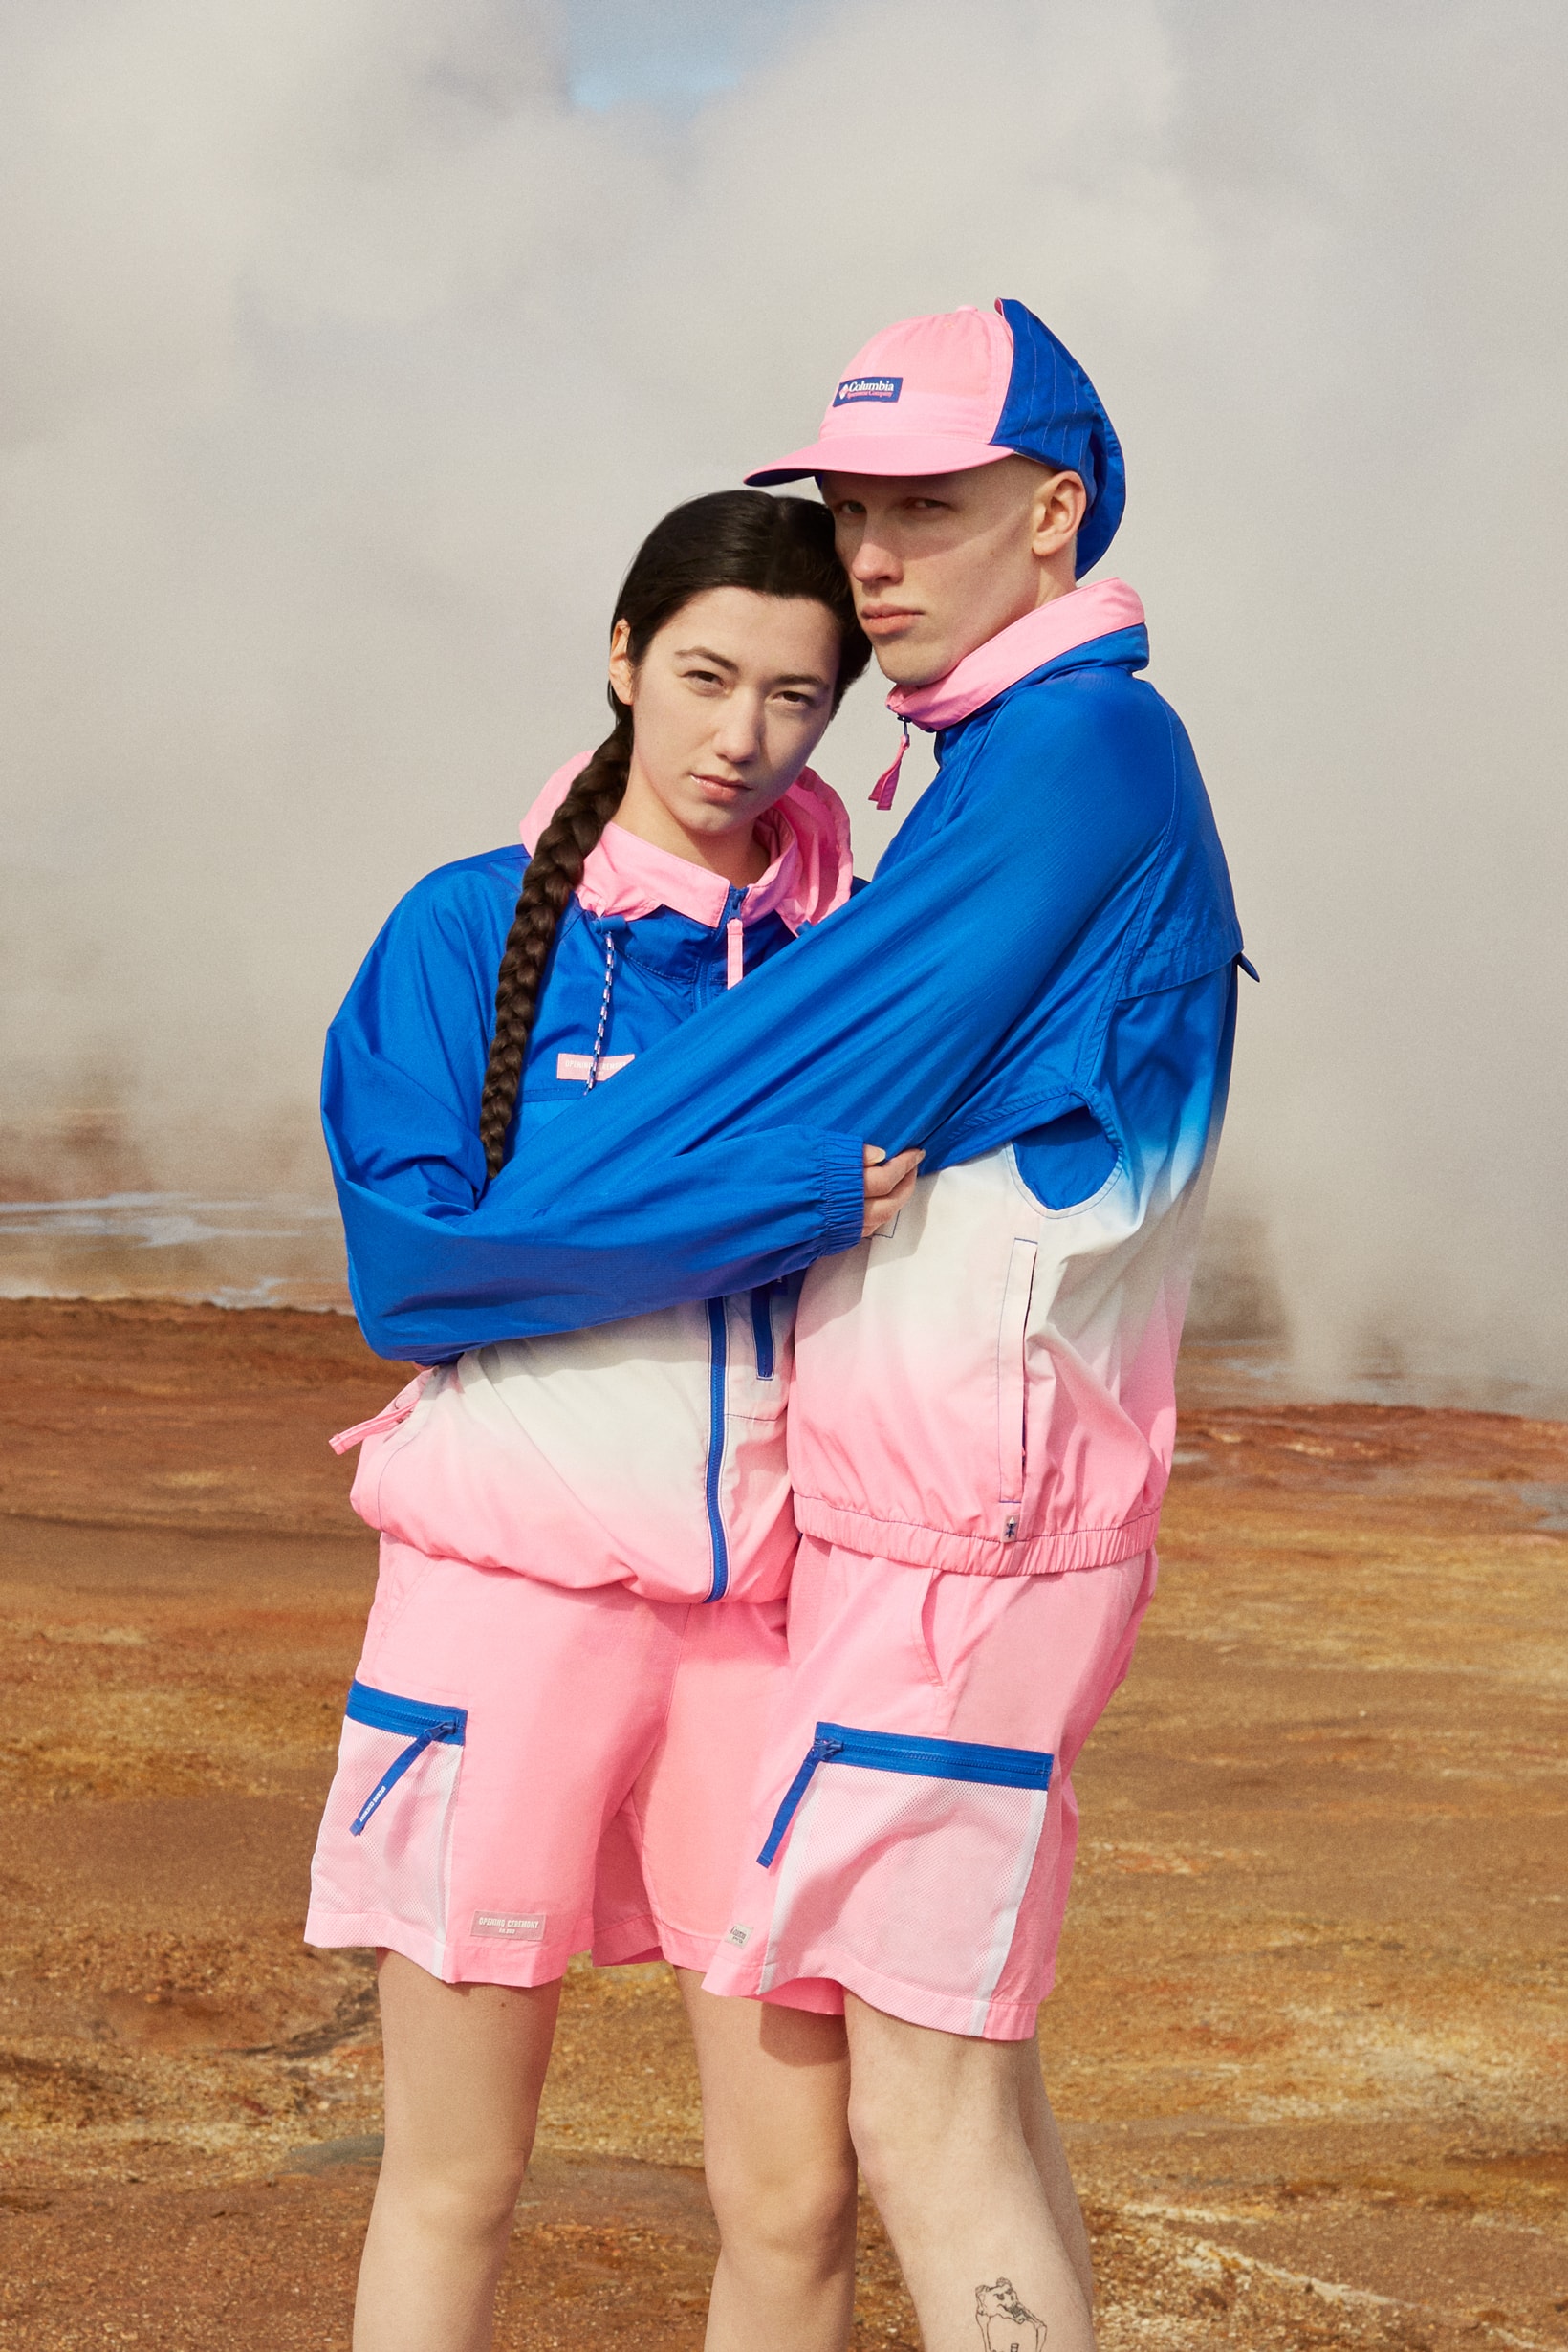 Opening Ceremony x Columbia Spring 2019 Capsule Collection Jacket Shorts Pink Blue